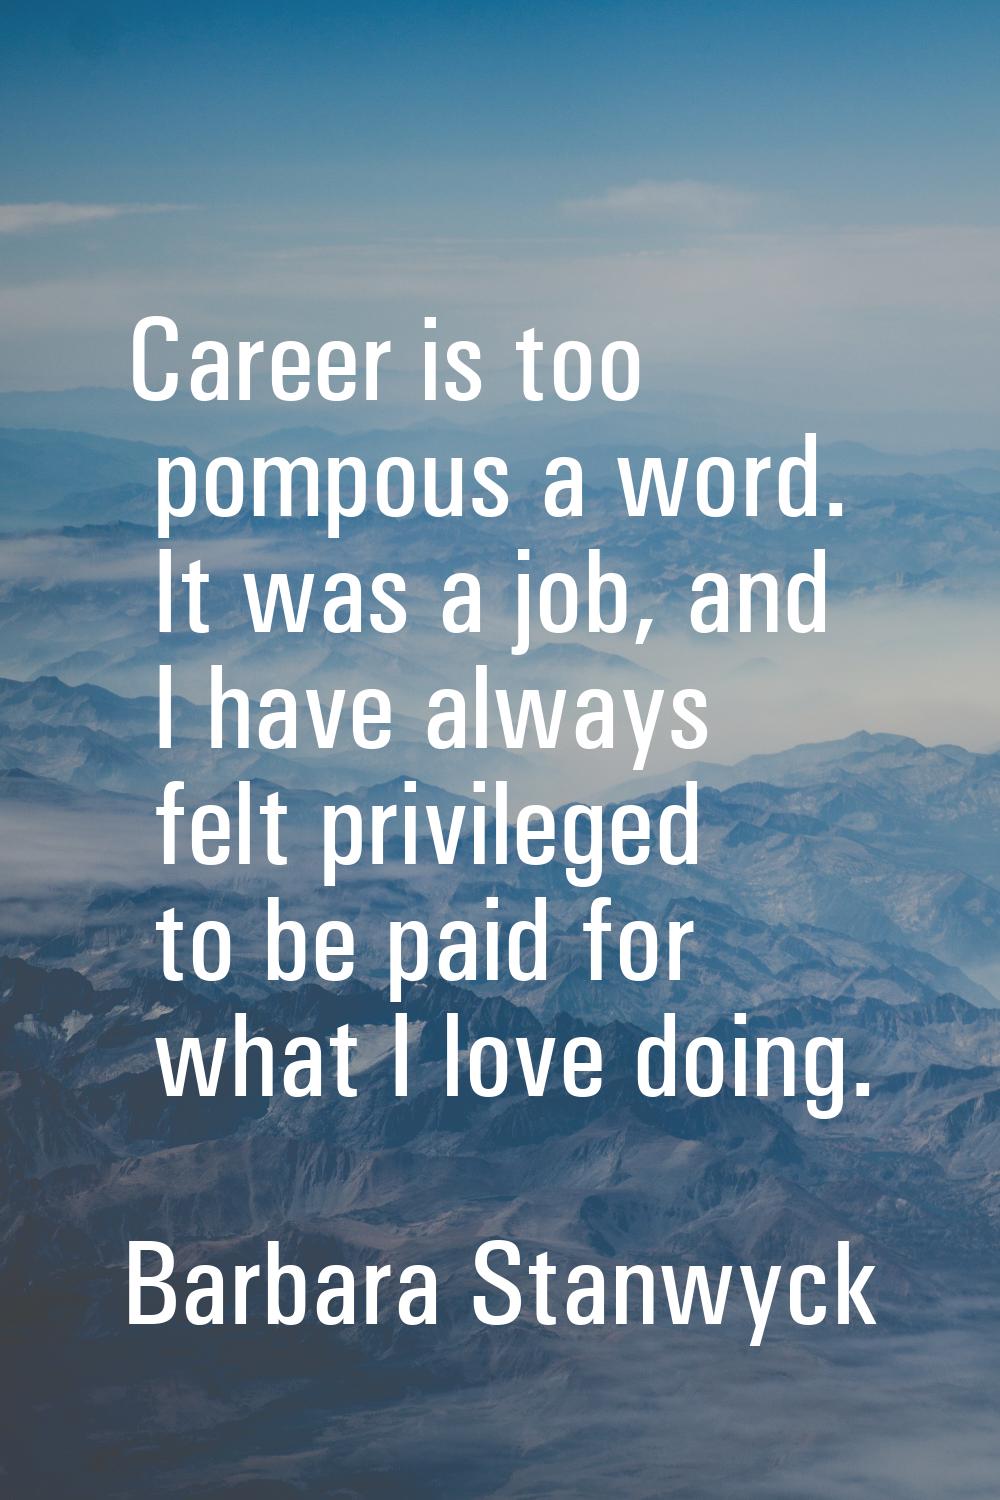 Career is too pompous a word. It was a job, and I have always felt privileged to be paid for what I